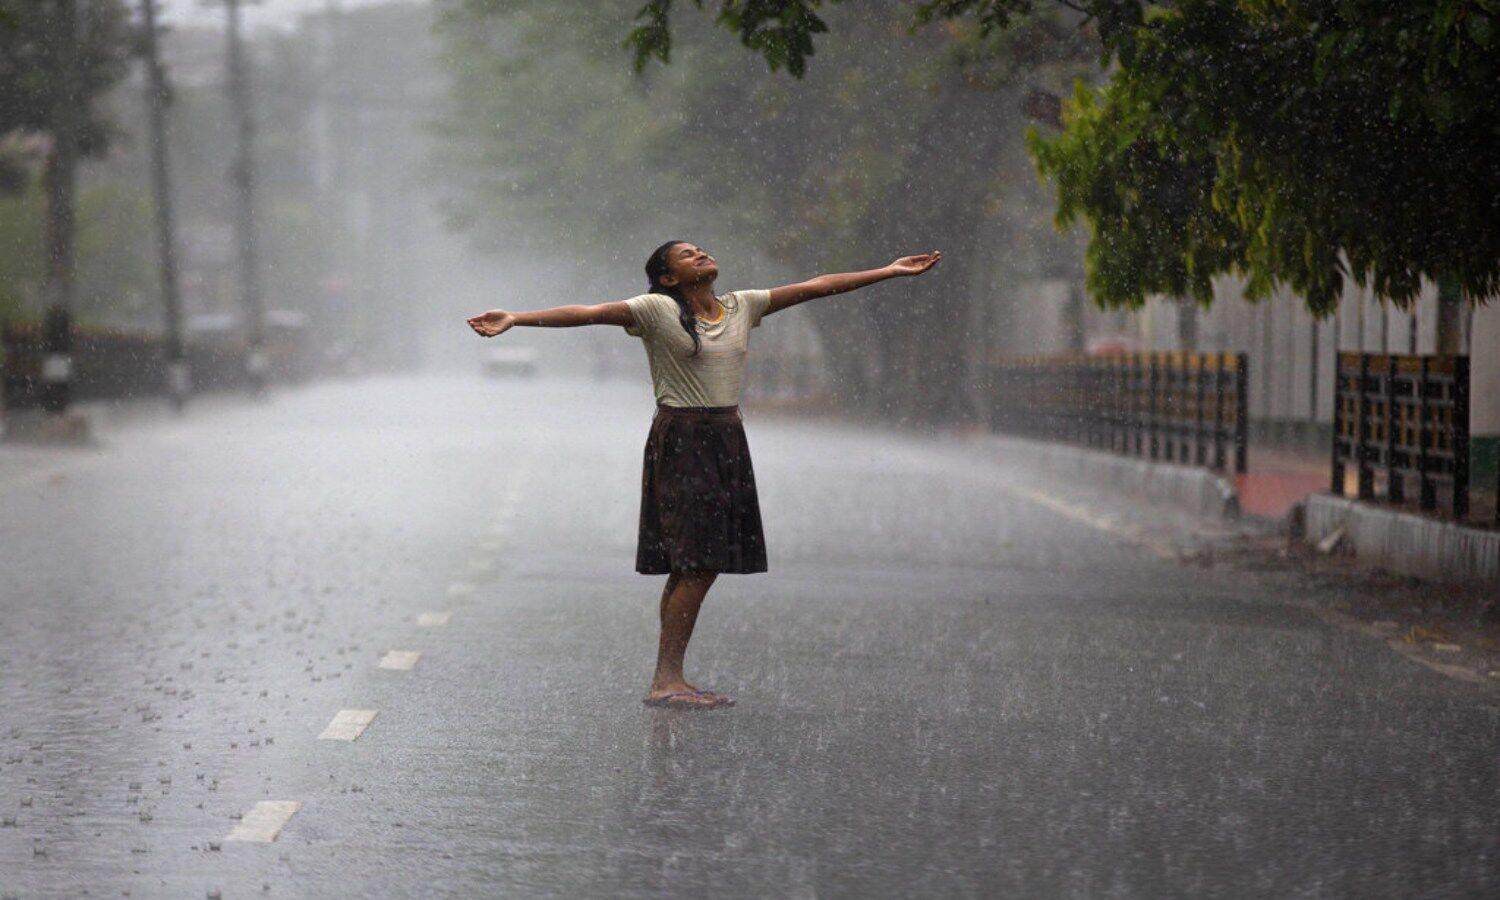 Weather Today: Heavy rain alert in these states, weather will deteriorate again in Maharashtra